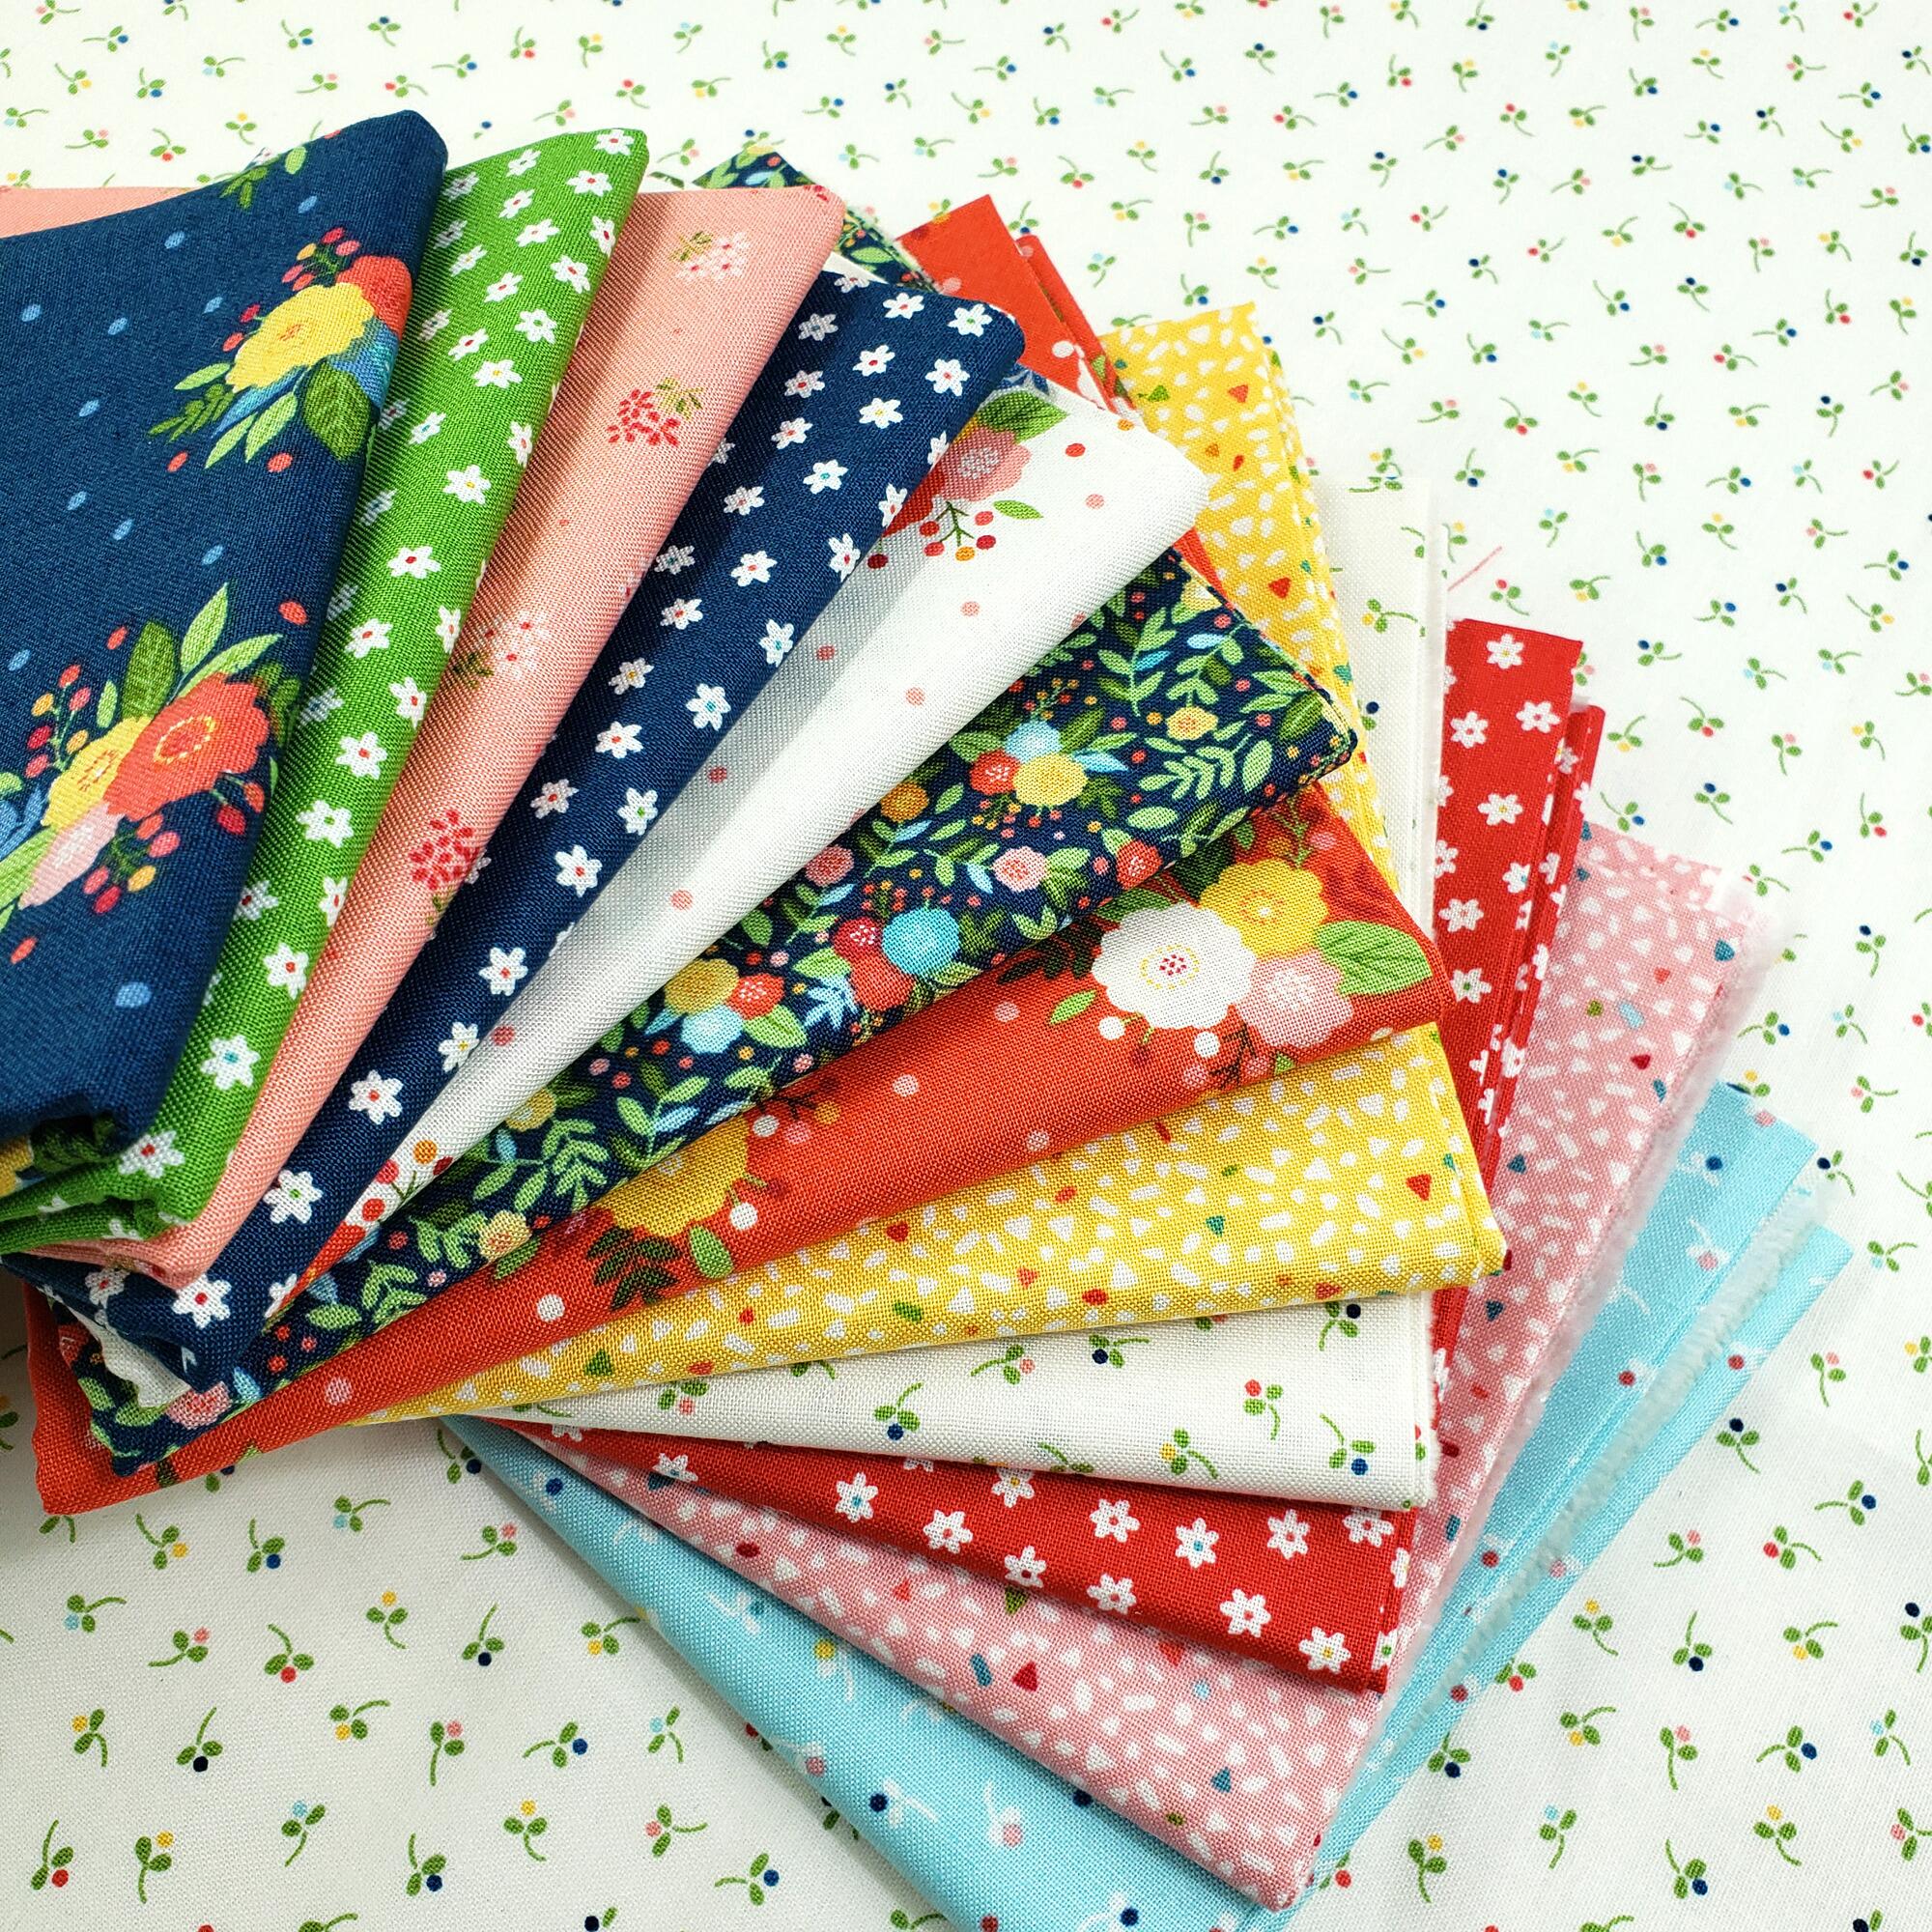 makower,amelia,fat quarters,cotton,floral,vintage,kitsch,red,blue,spots,abstract,girly,cottage,bags,quilting,sewing,flowers